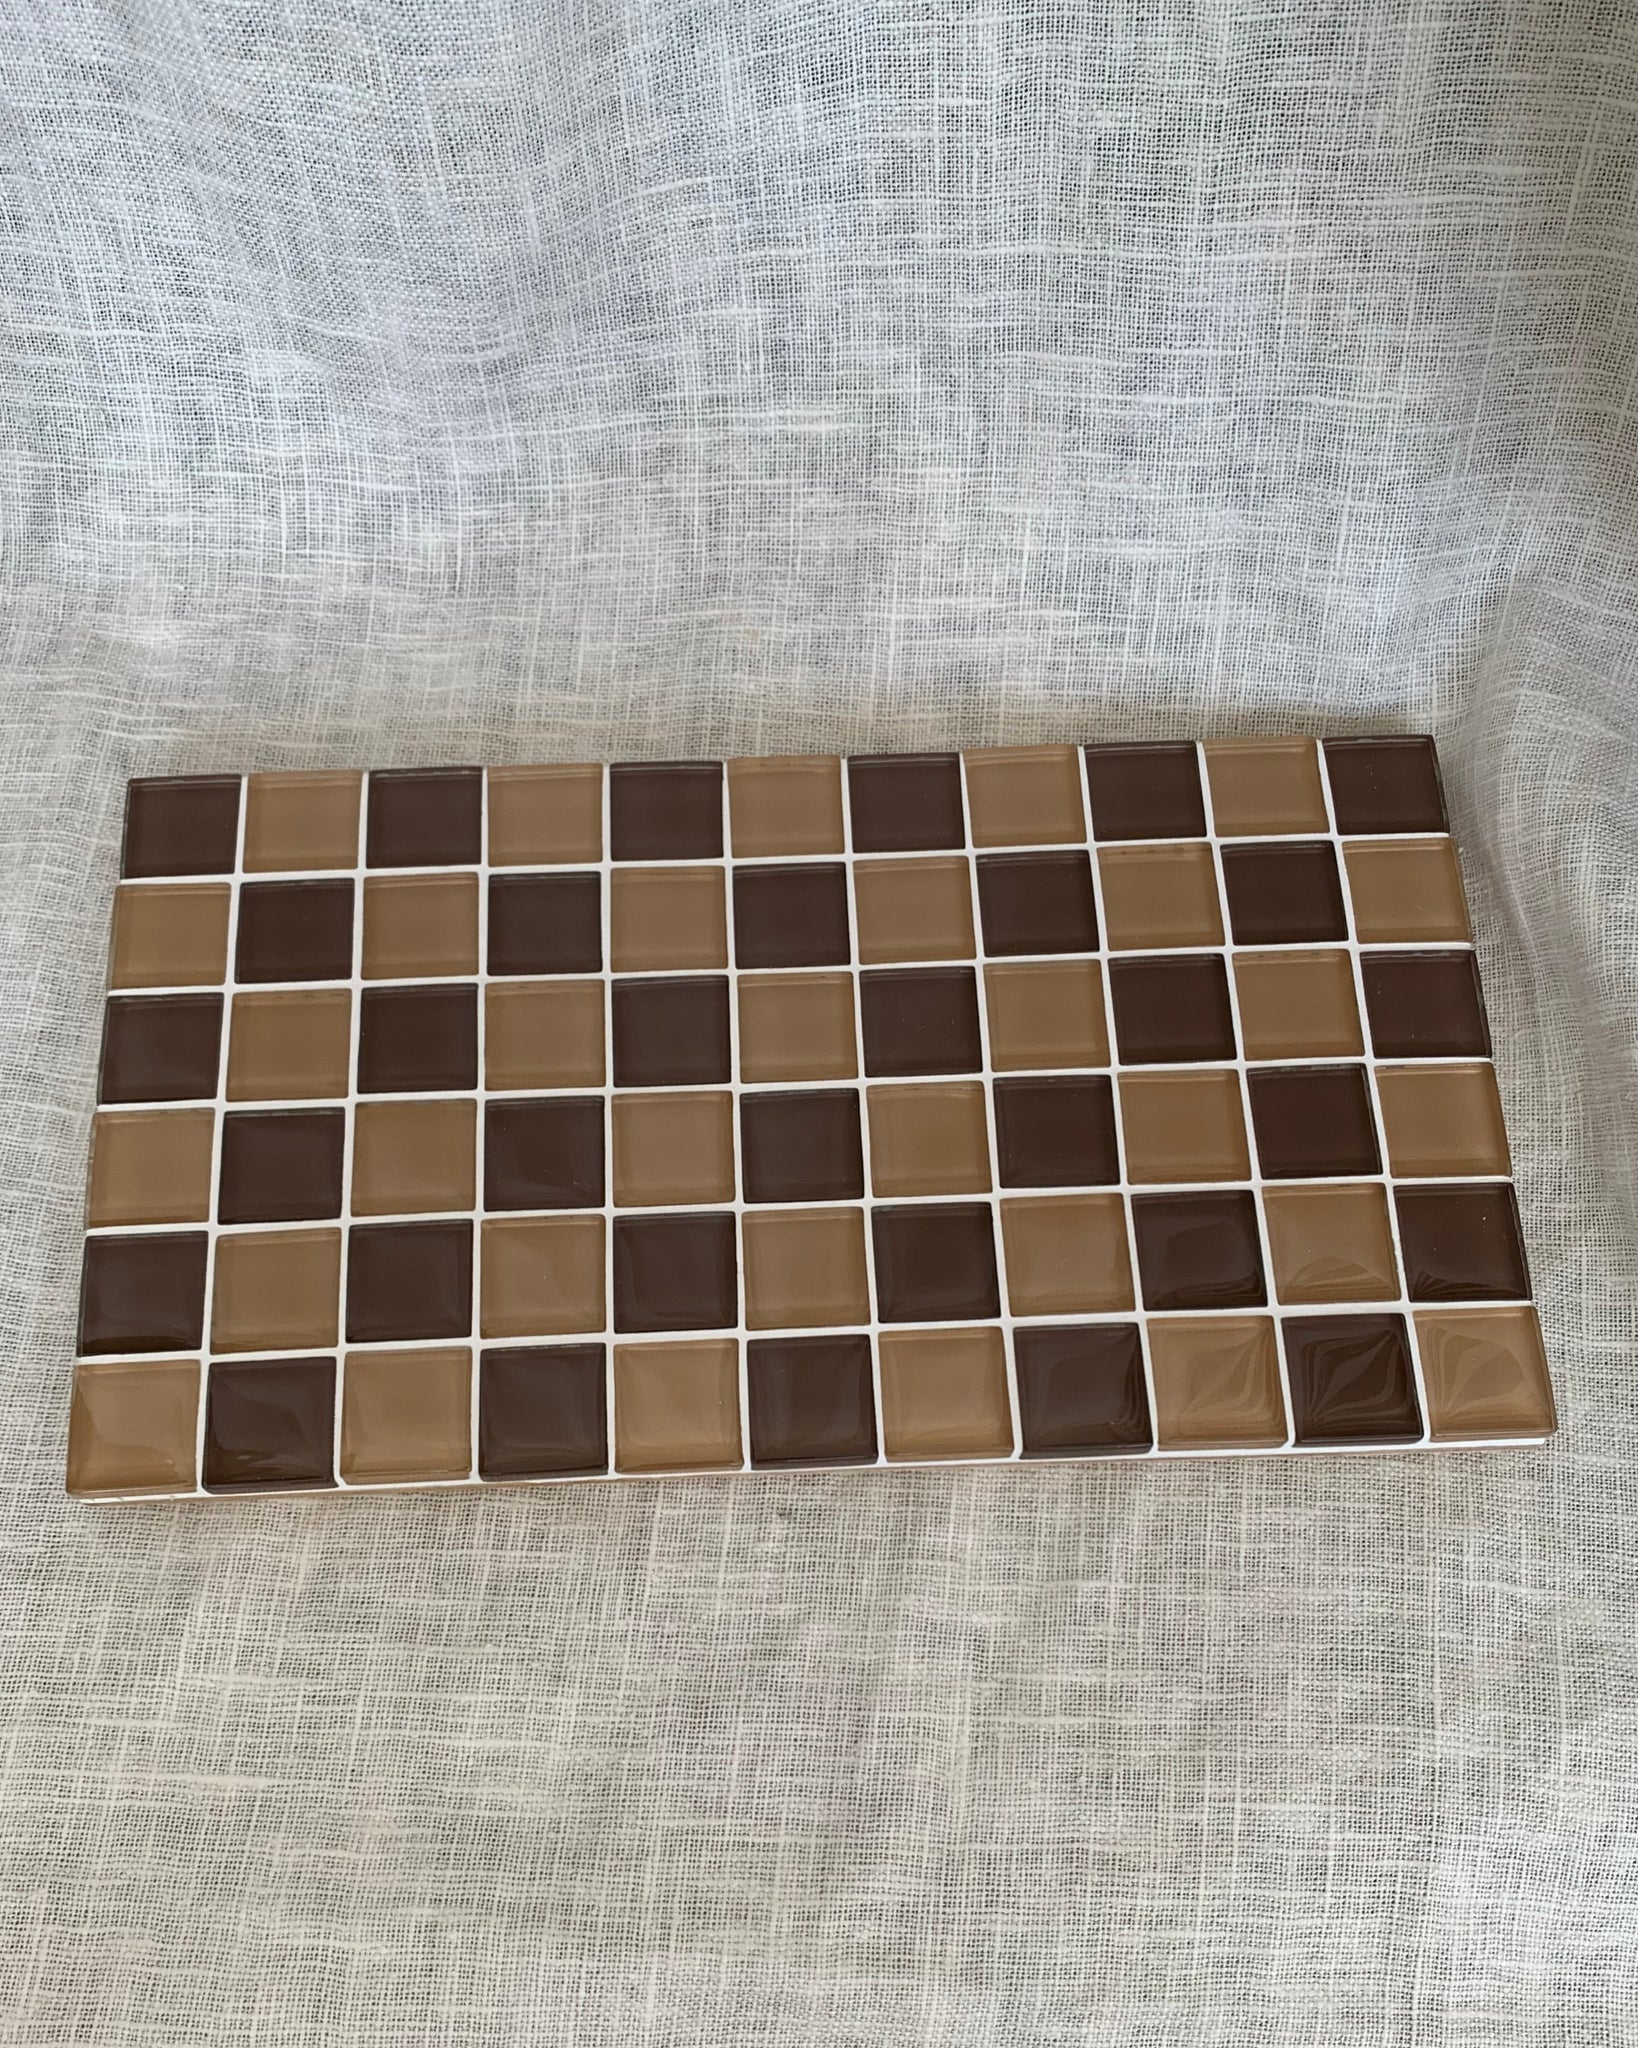 GLASS TILE DECORATIVE TRAY - VINTAGE LOVE CHECKERED